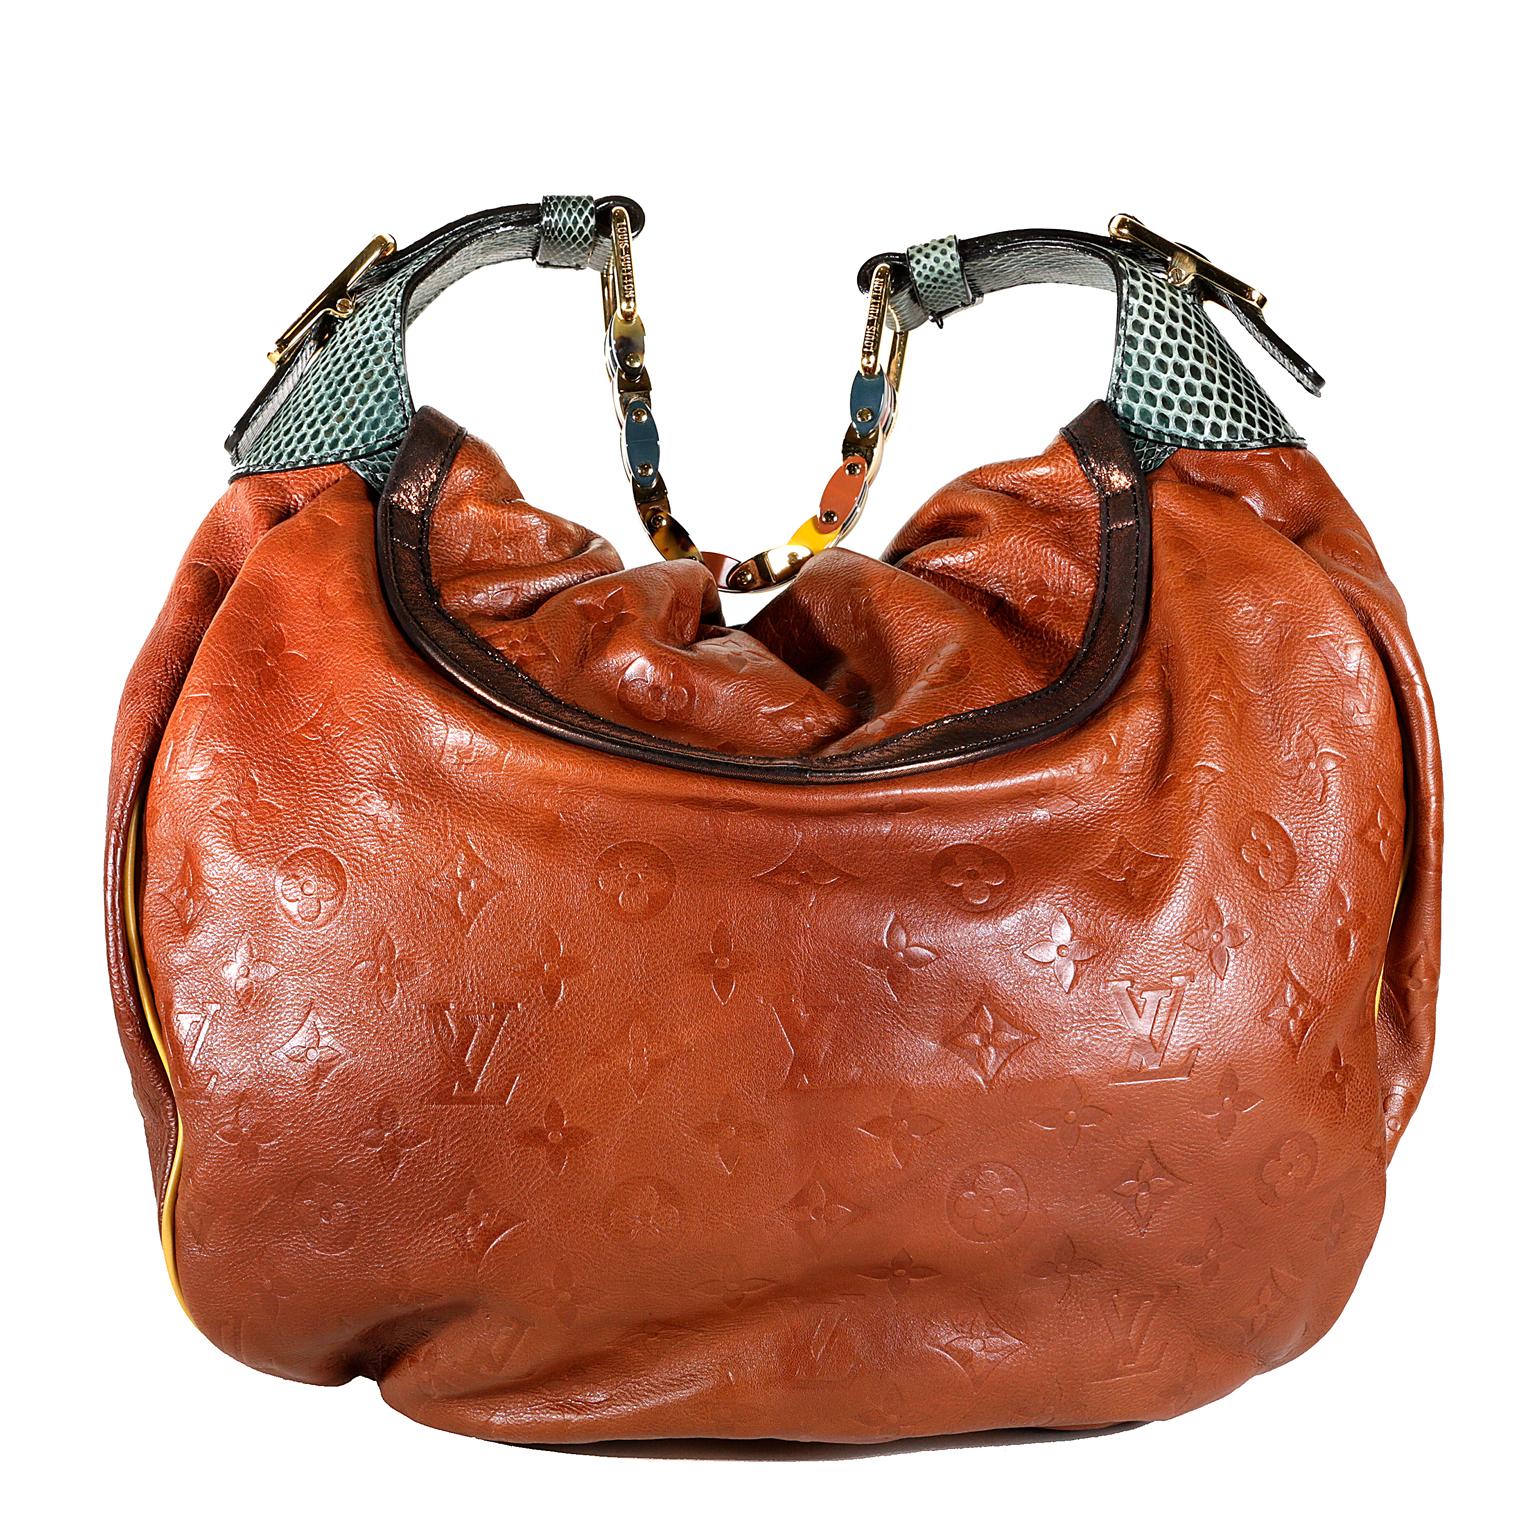 Louis Vuitton Paprika Monogram Leather Kalahari GM - NEW condition
 From the Spring Summer 2009 Collection, this special edition of the Kalahari has some amazing design elements.  
Rich Paprika calfskin is subtly imprinted with signature Louis